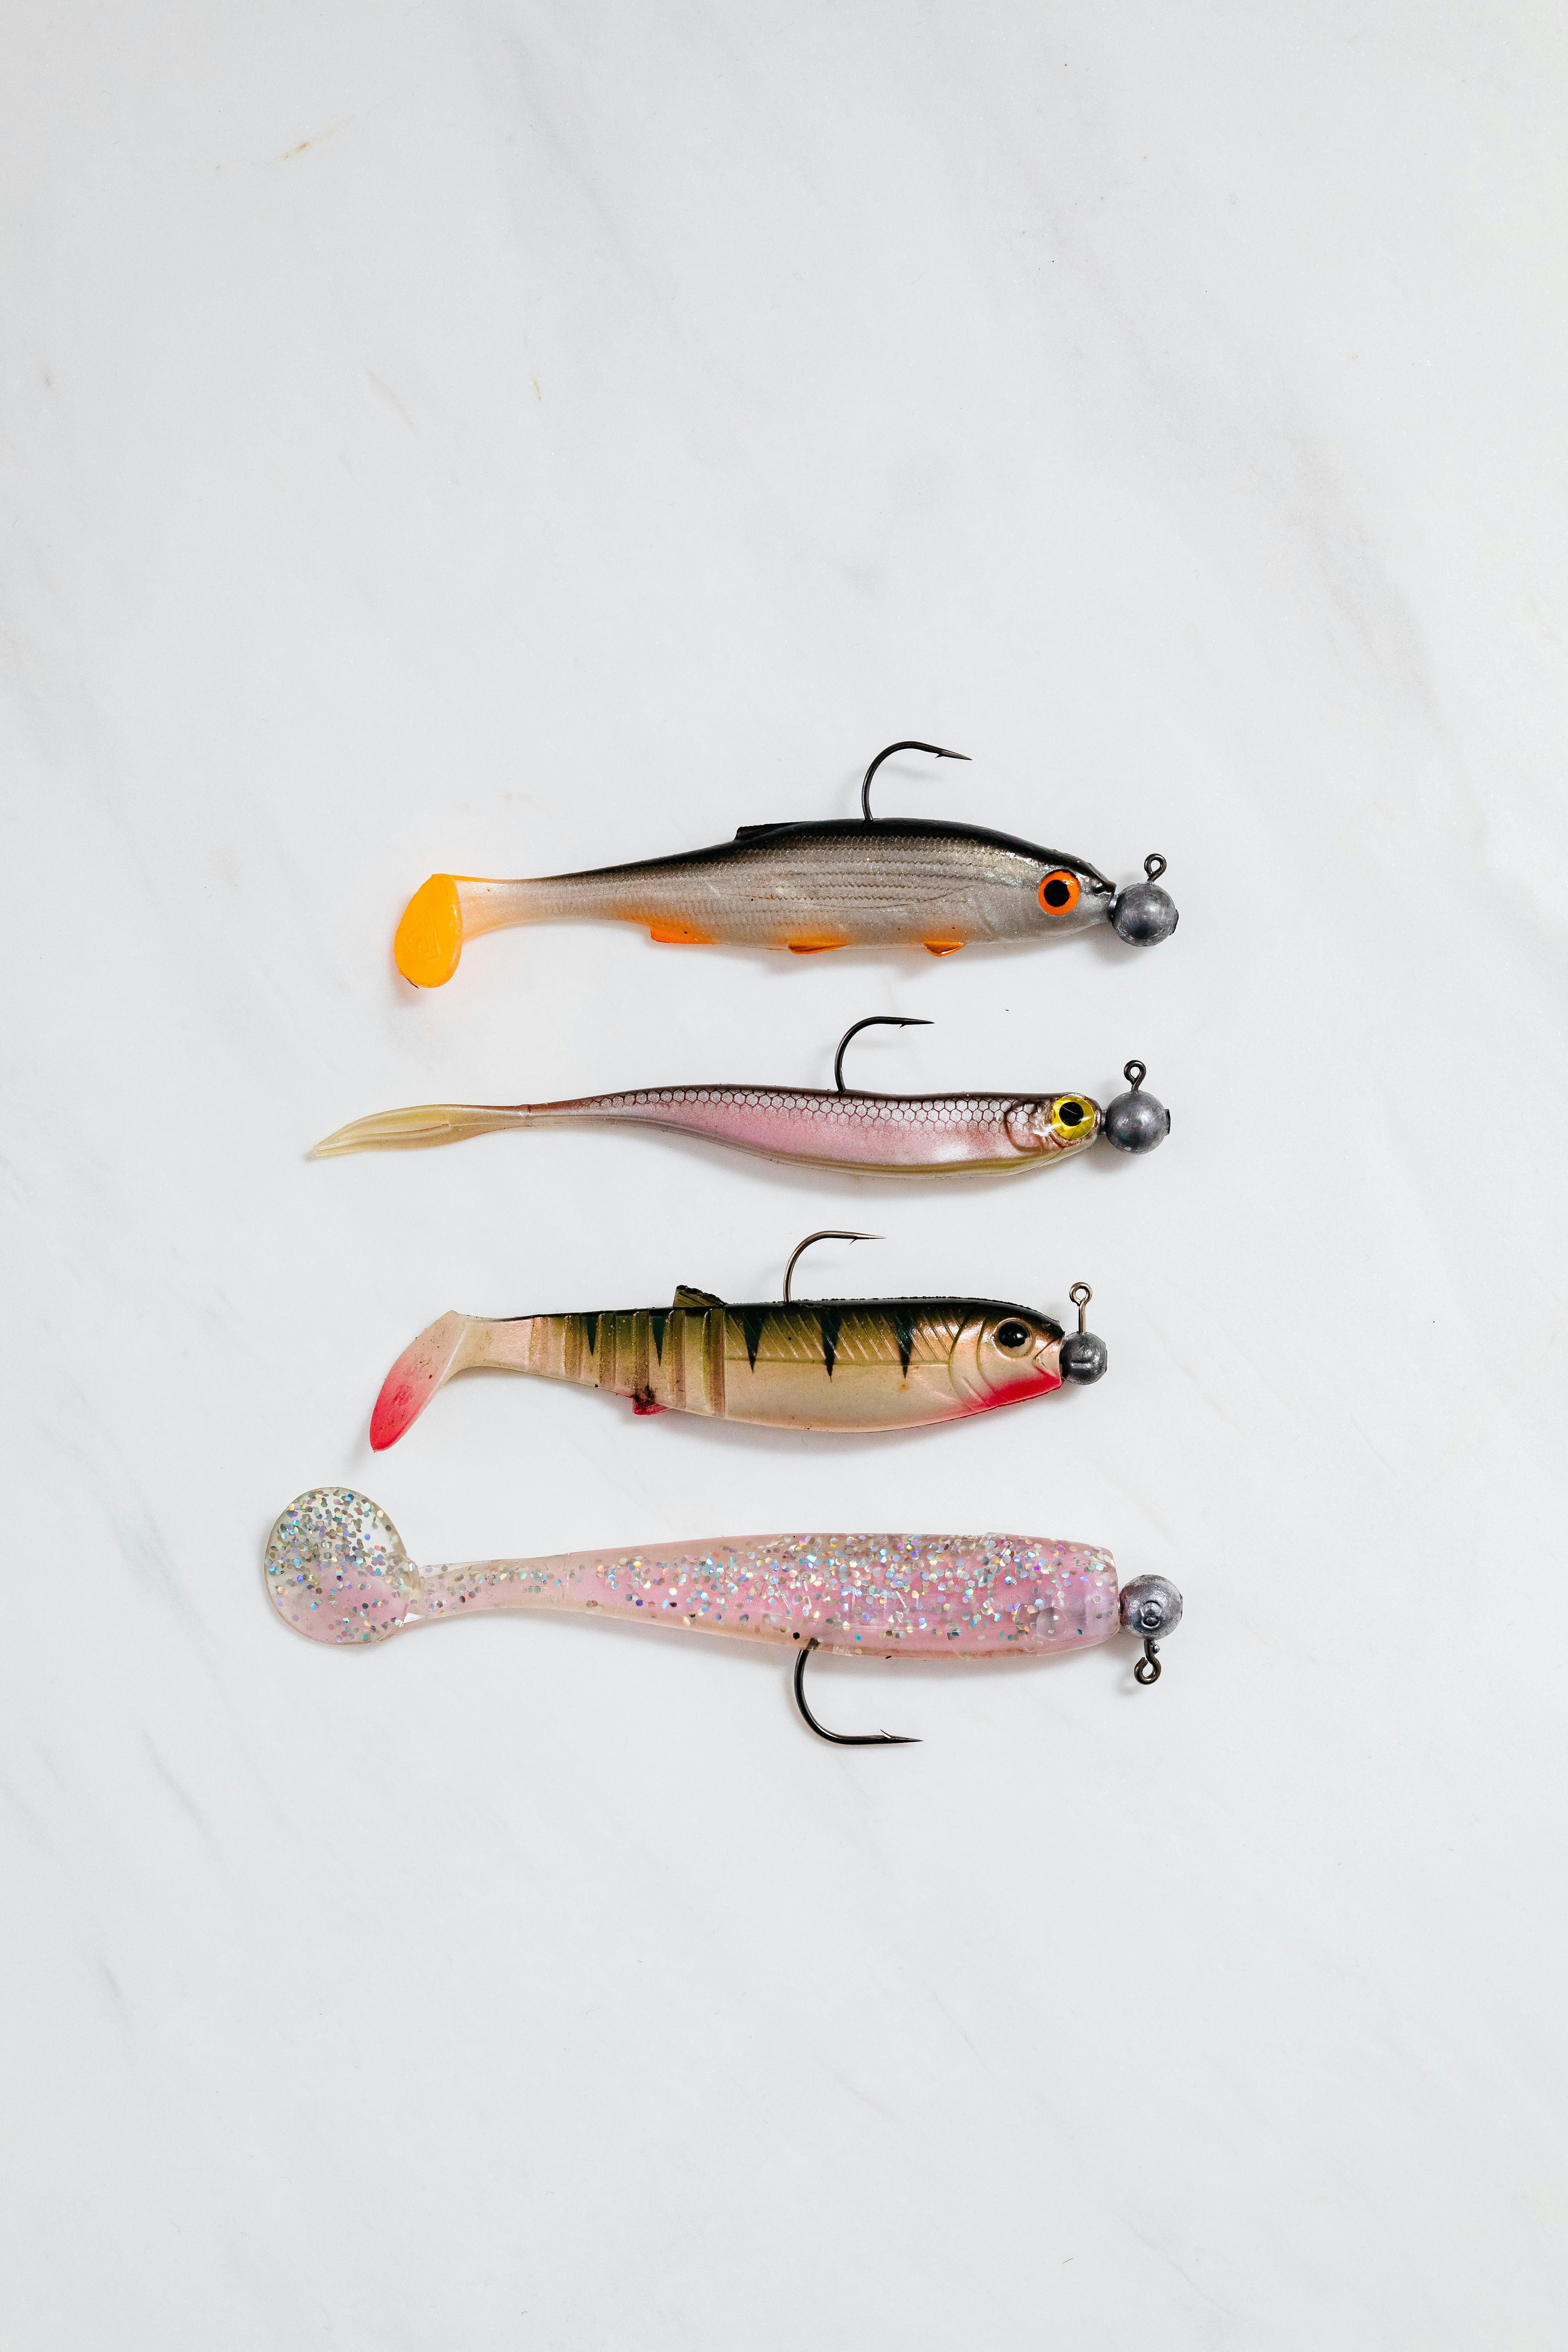 Close-up Photo of Fishing Lures · Free Stock Photo